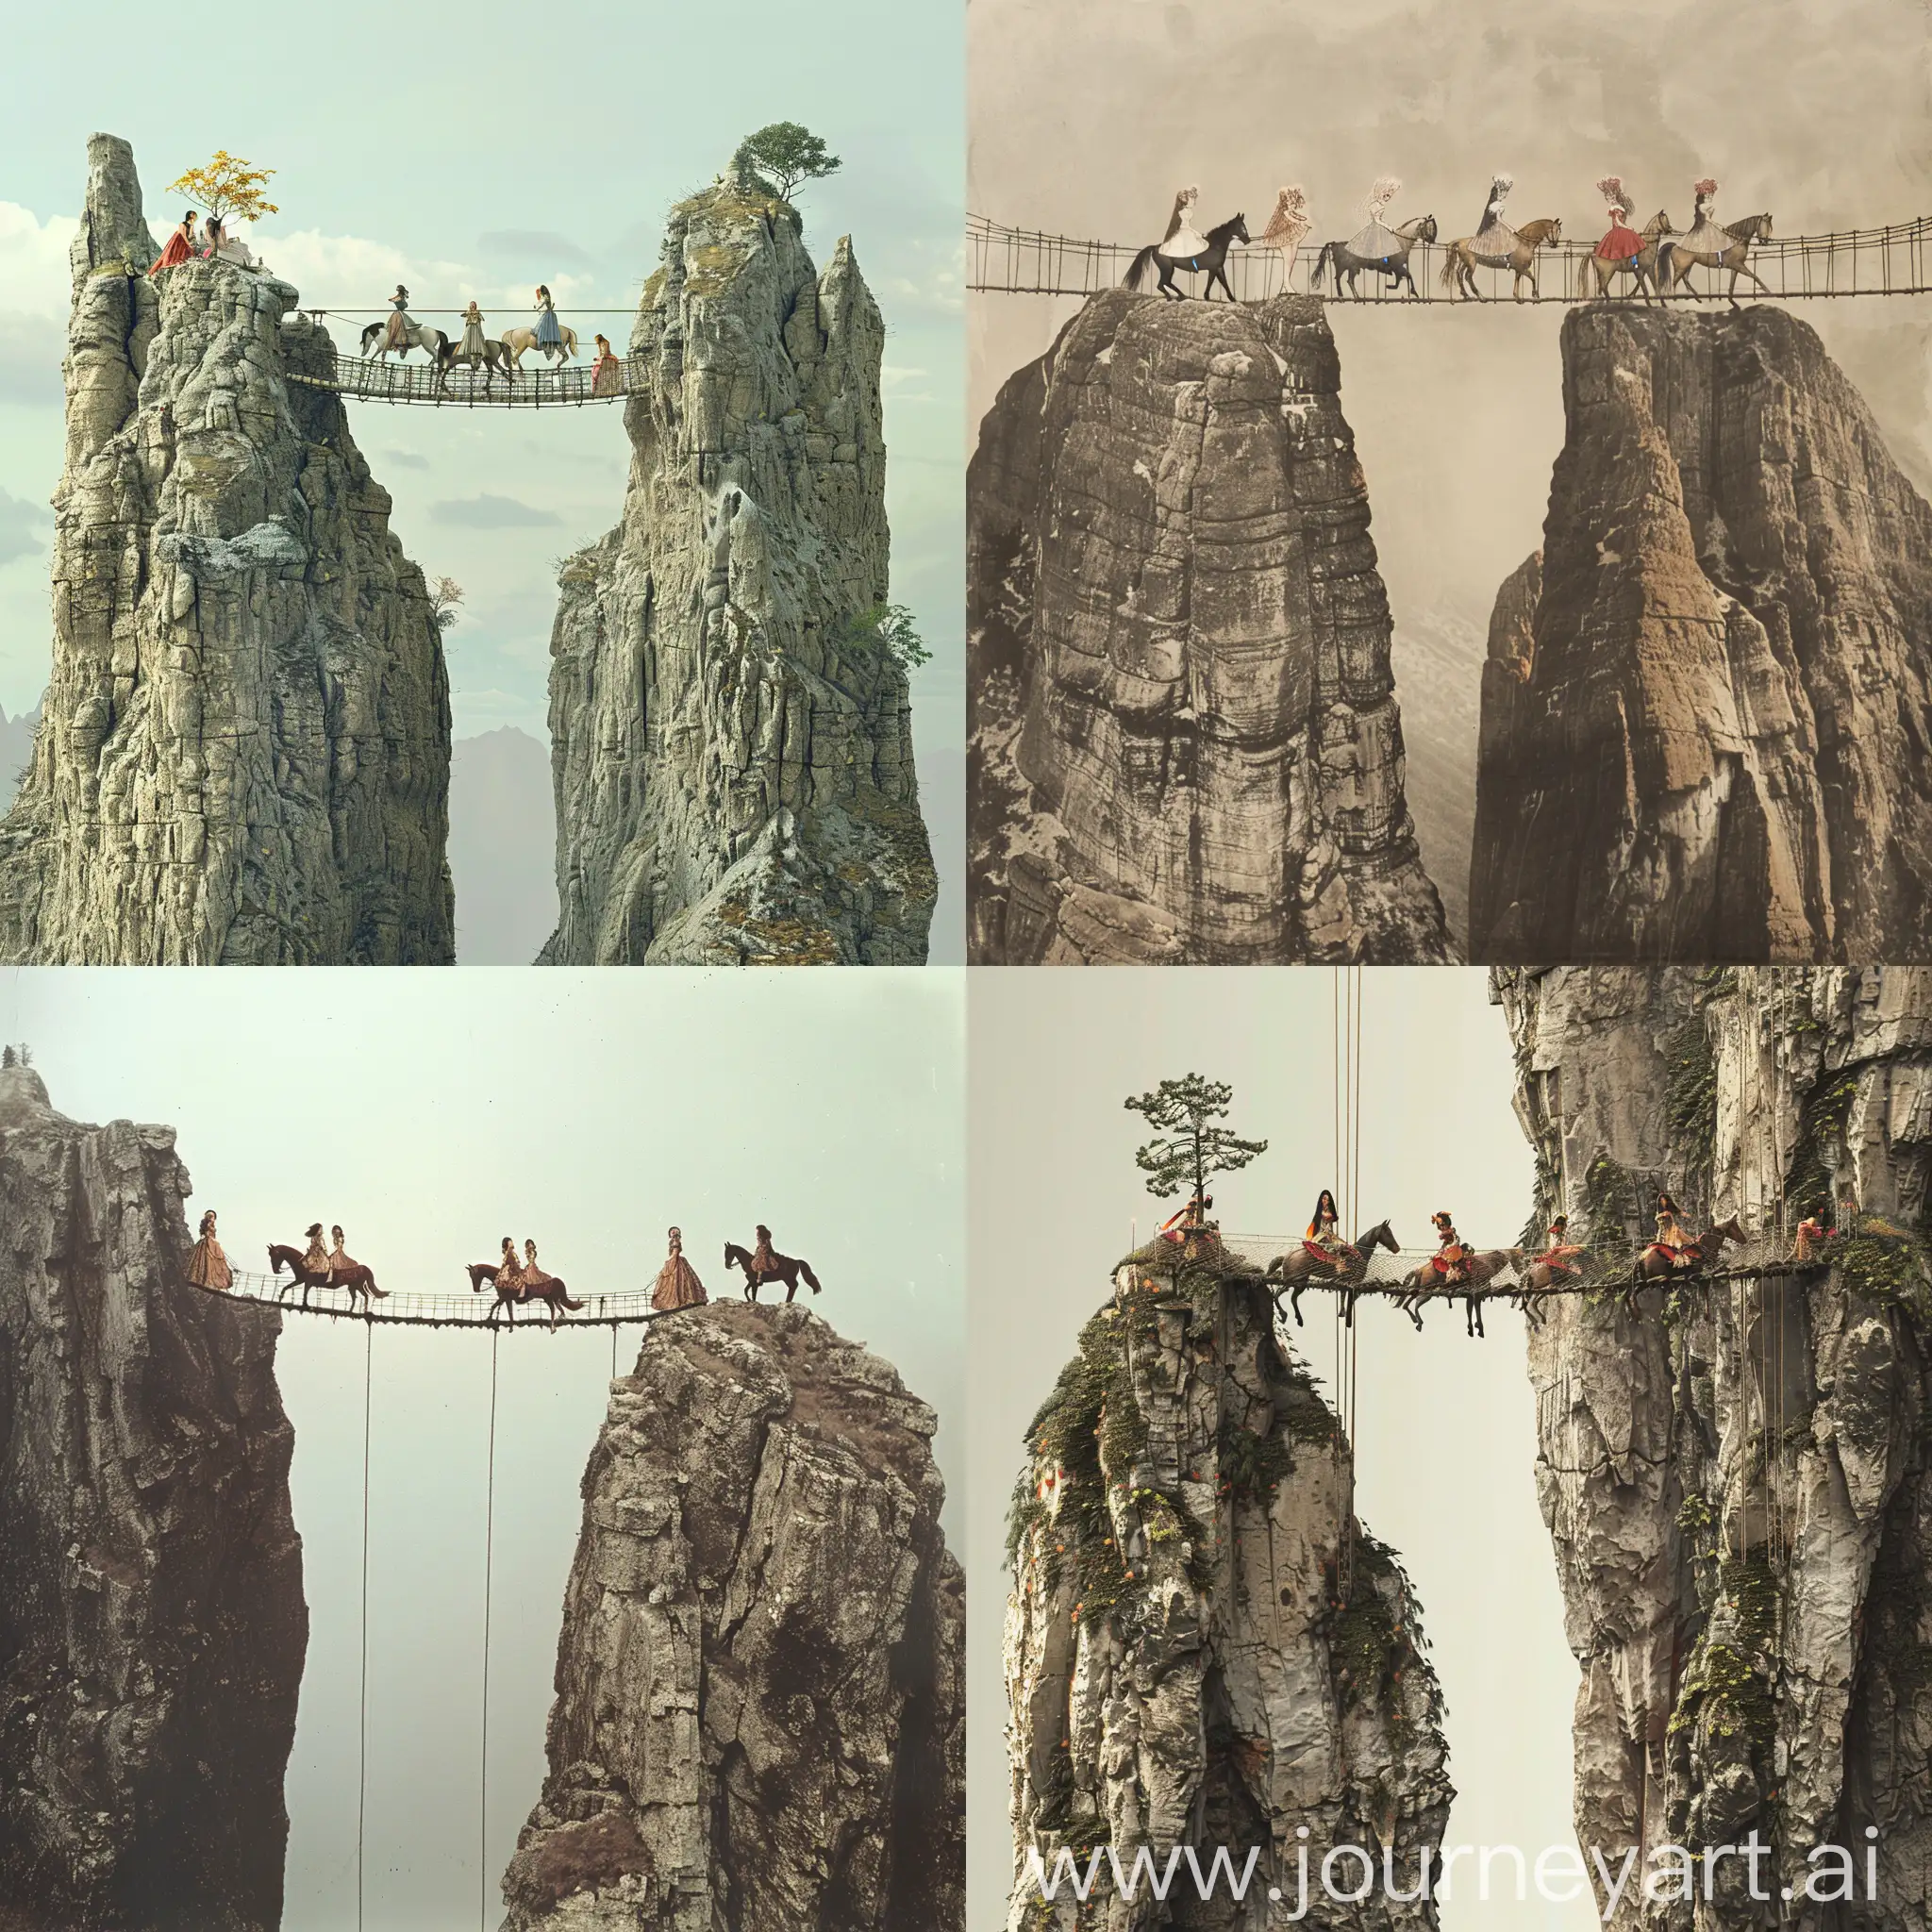 Suspended-Bridge-Between-Two-Majestic-Mountains-with-Graceful-HorseRiding-Maidens